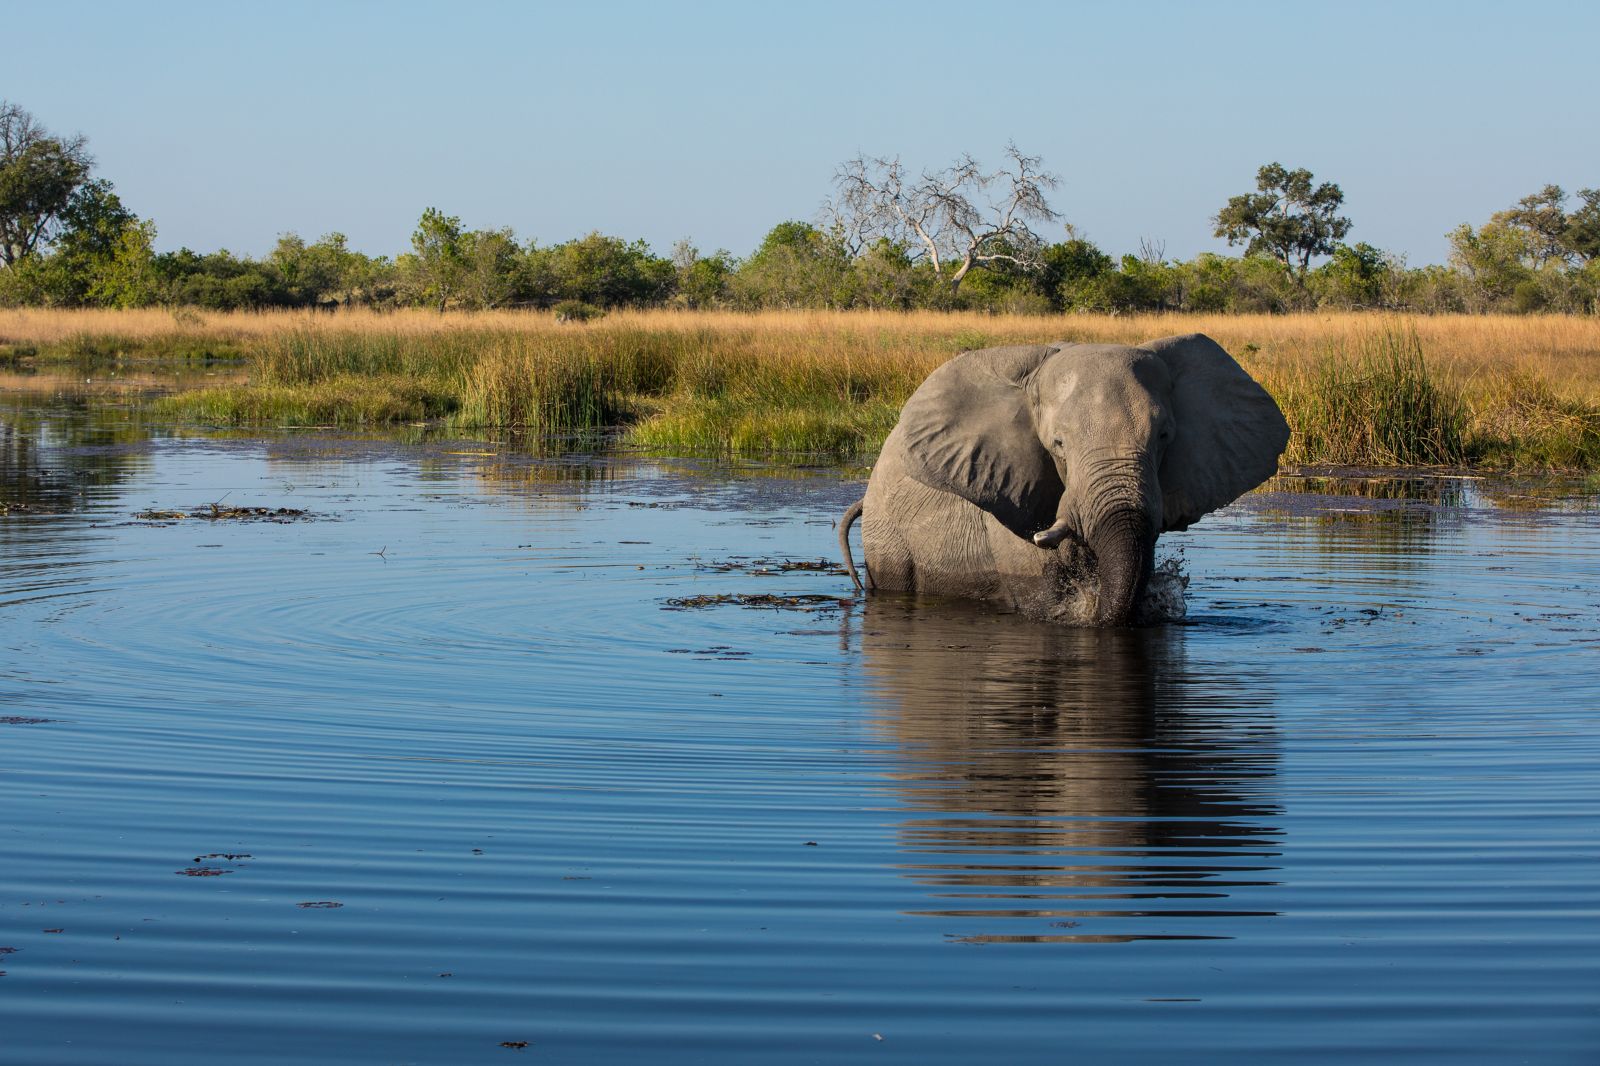 An Elephant spotted on the grounds of Selinda Camp in the Selinda Reserve in Botswana